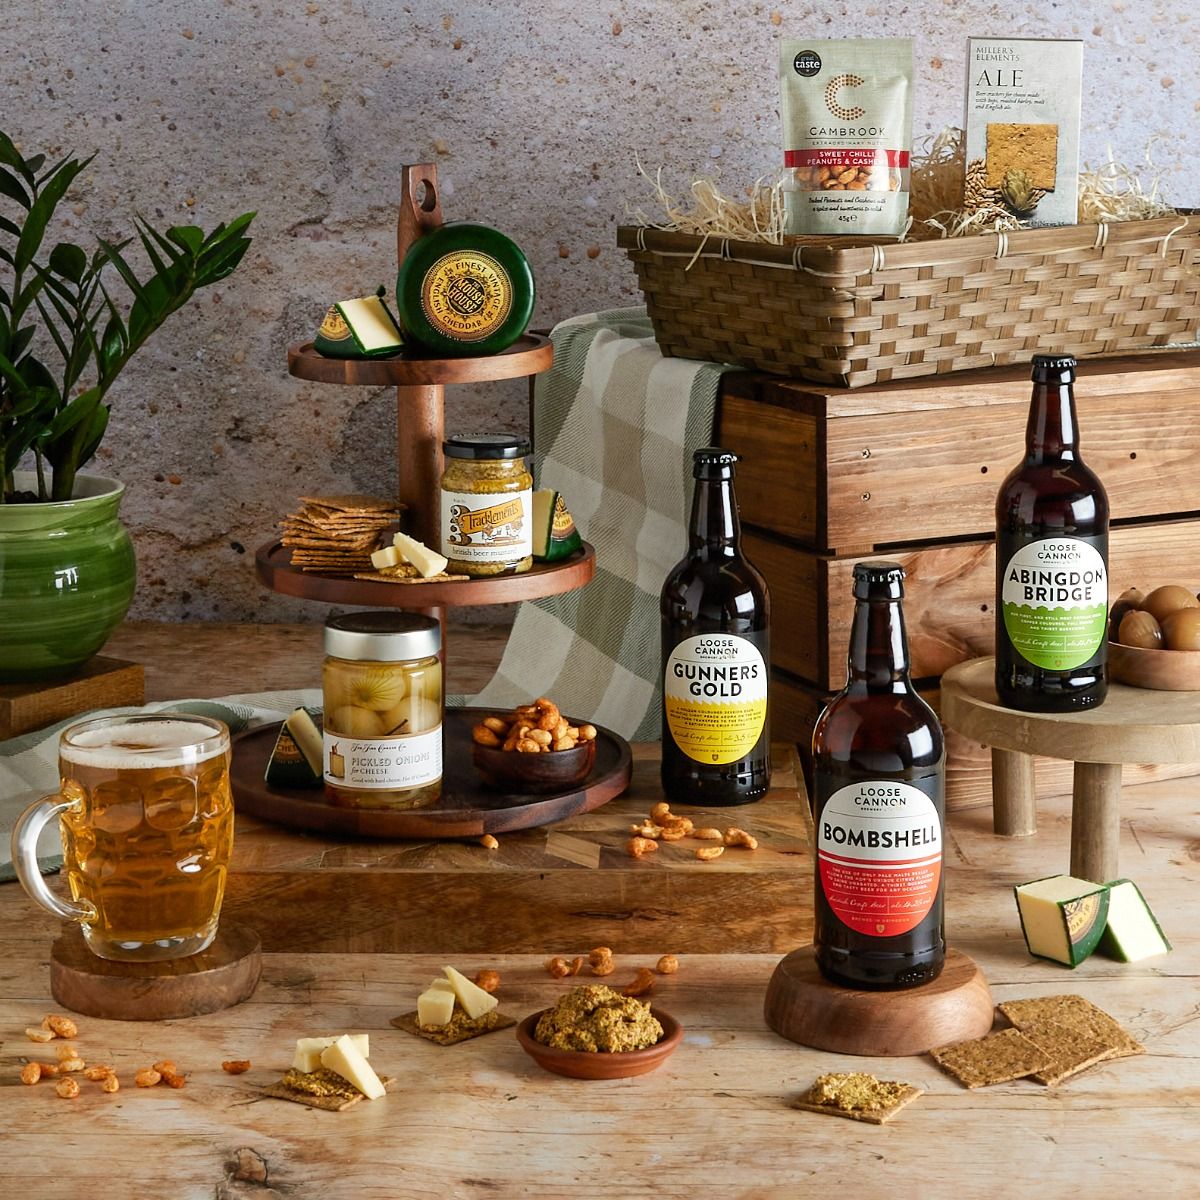 Real Ale & Cheese Hamper with contents on display